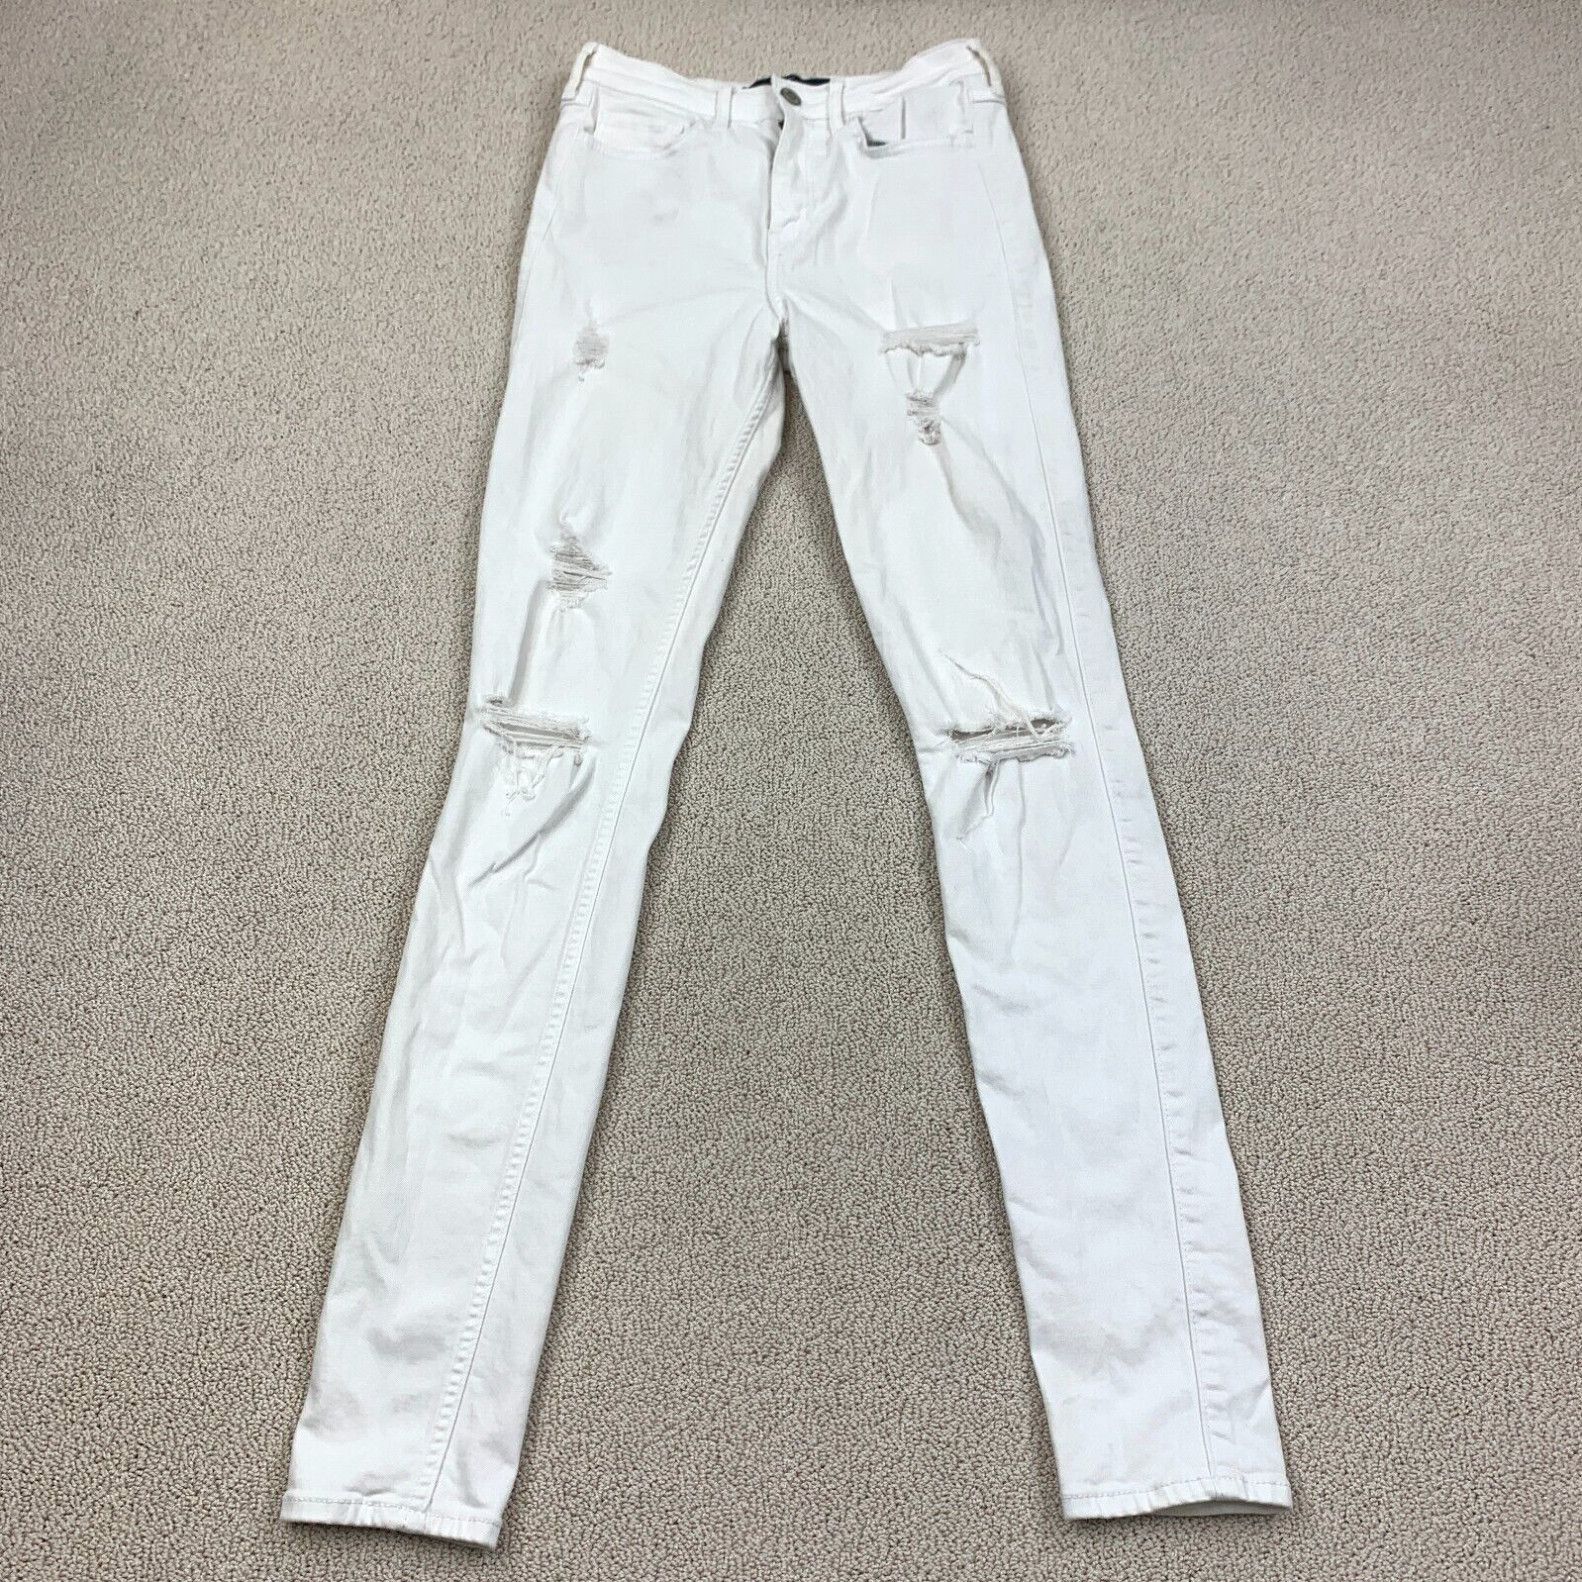 Vintage Hollister Classic Stretch High-Rise Super Skinny Jeans Juniors 3L 26x32 White Size ONE SIZE - 1 Preview